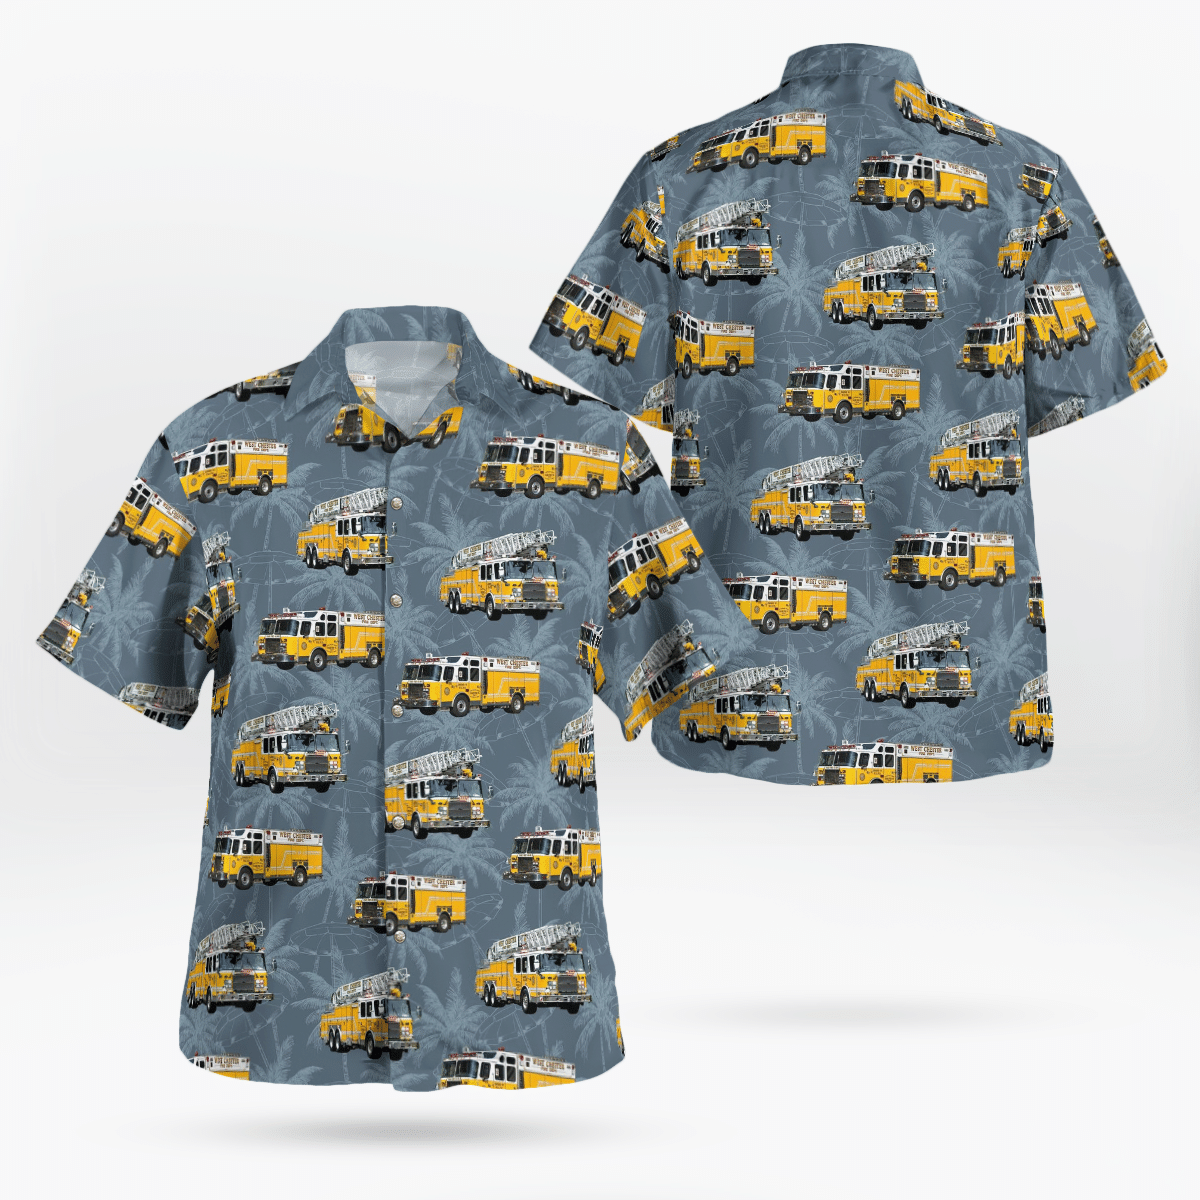 If you want to be noticed, wear These Trendy Hawaiian Shirt 78